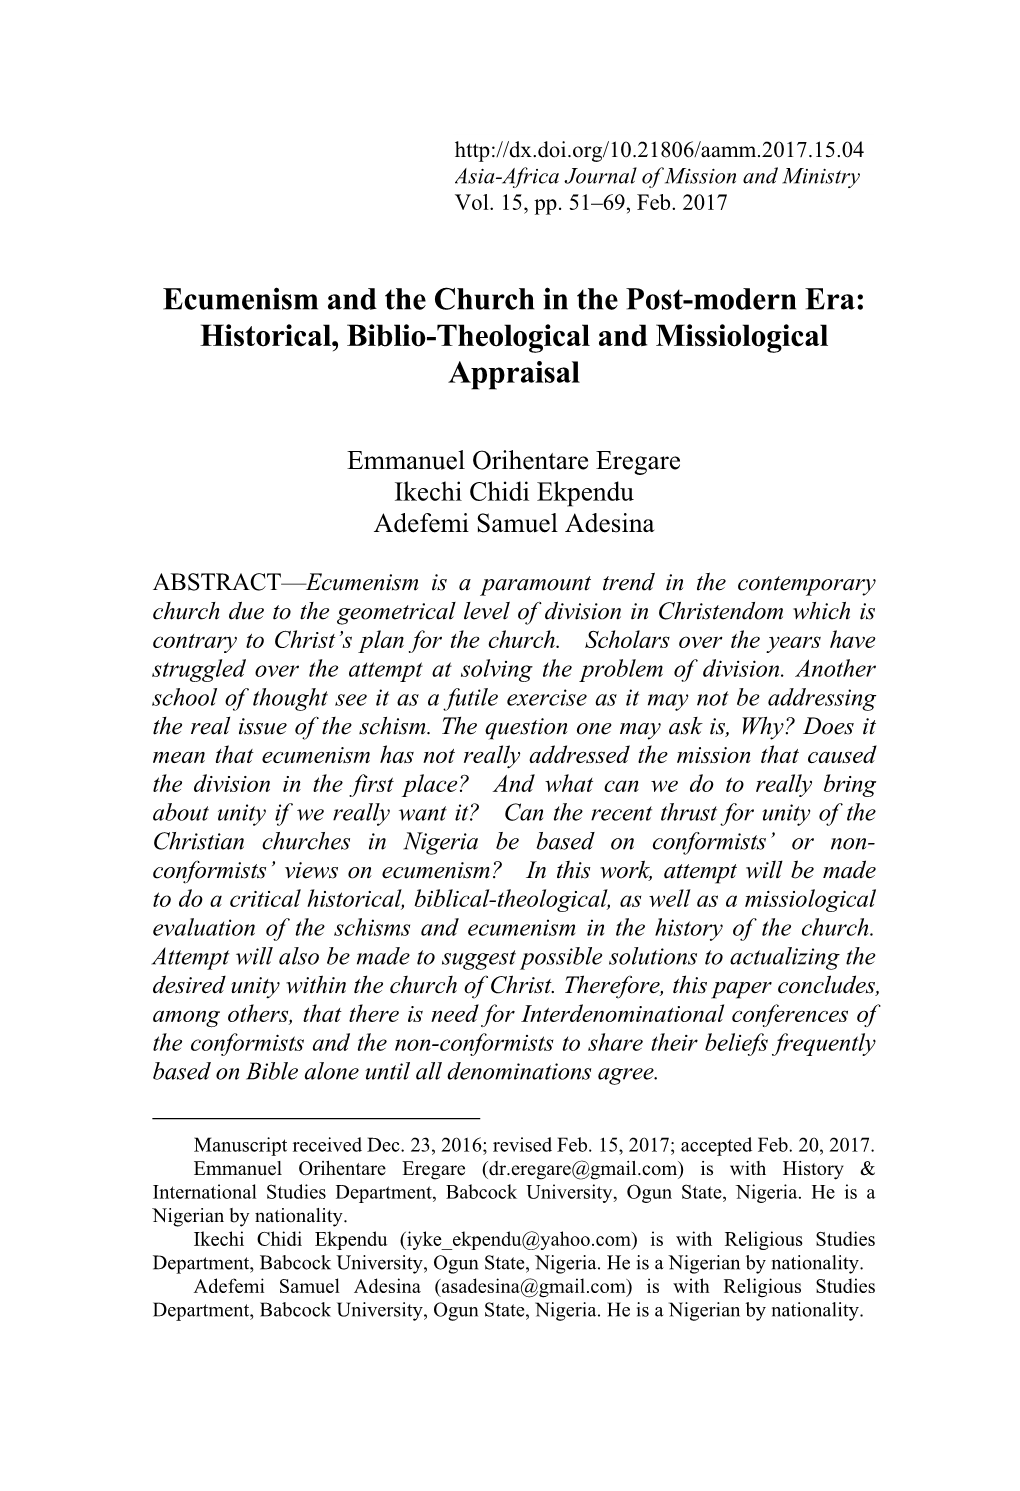 Ecumenism and the Church in the Post-Modern Era: Historical, Biblio-Theological and Missiological Appraisal